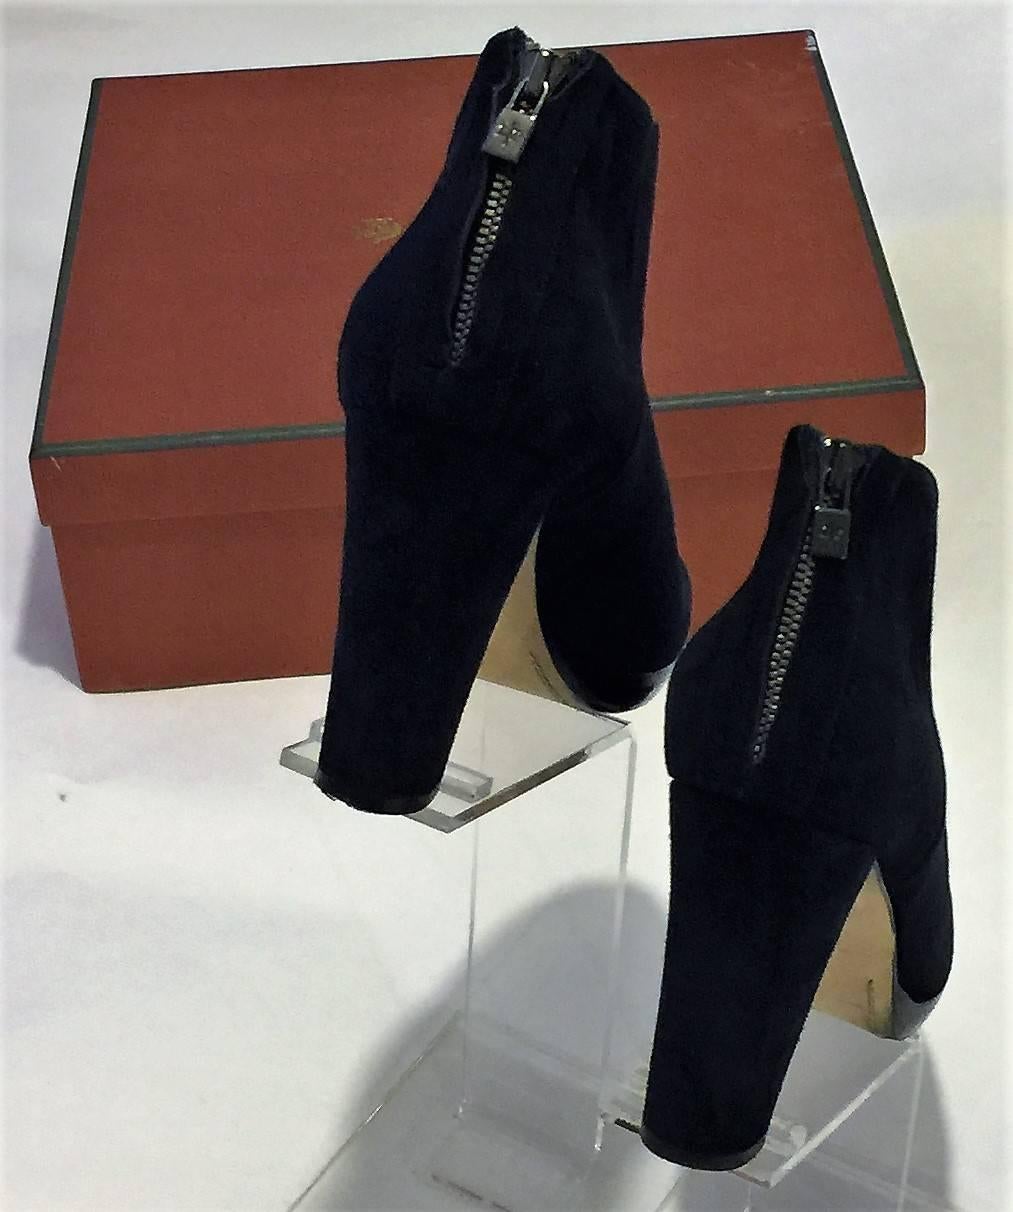 Loro Piana ‘Charlene’ Ankle Boots. Size EU 39.  Expertly crafted in Italy from butter-soft rich navy suede with a comfortable block heel.  Very feminine ankle boots lined in nappa kidskin.  The perfect complement to city and country wear ensembles. 